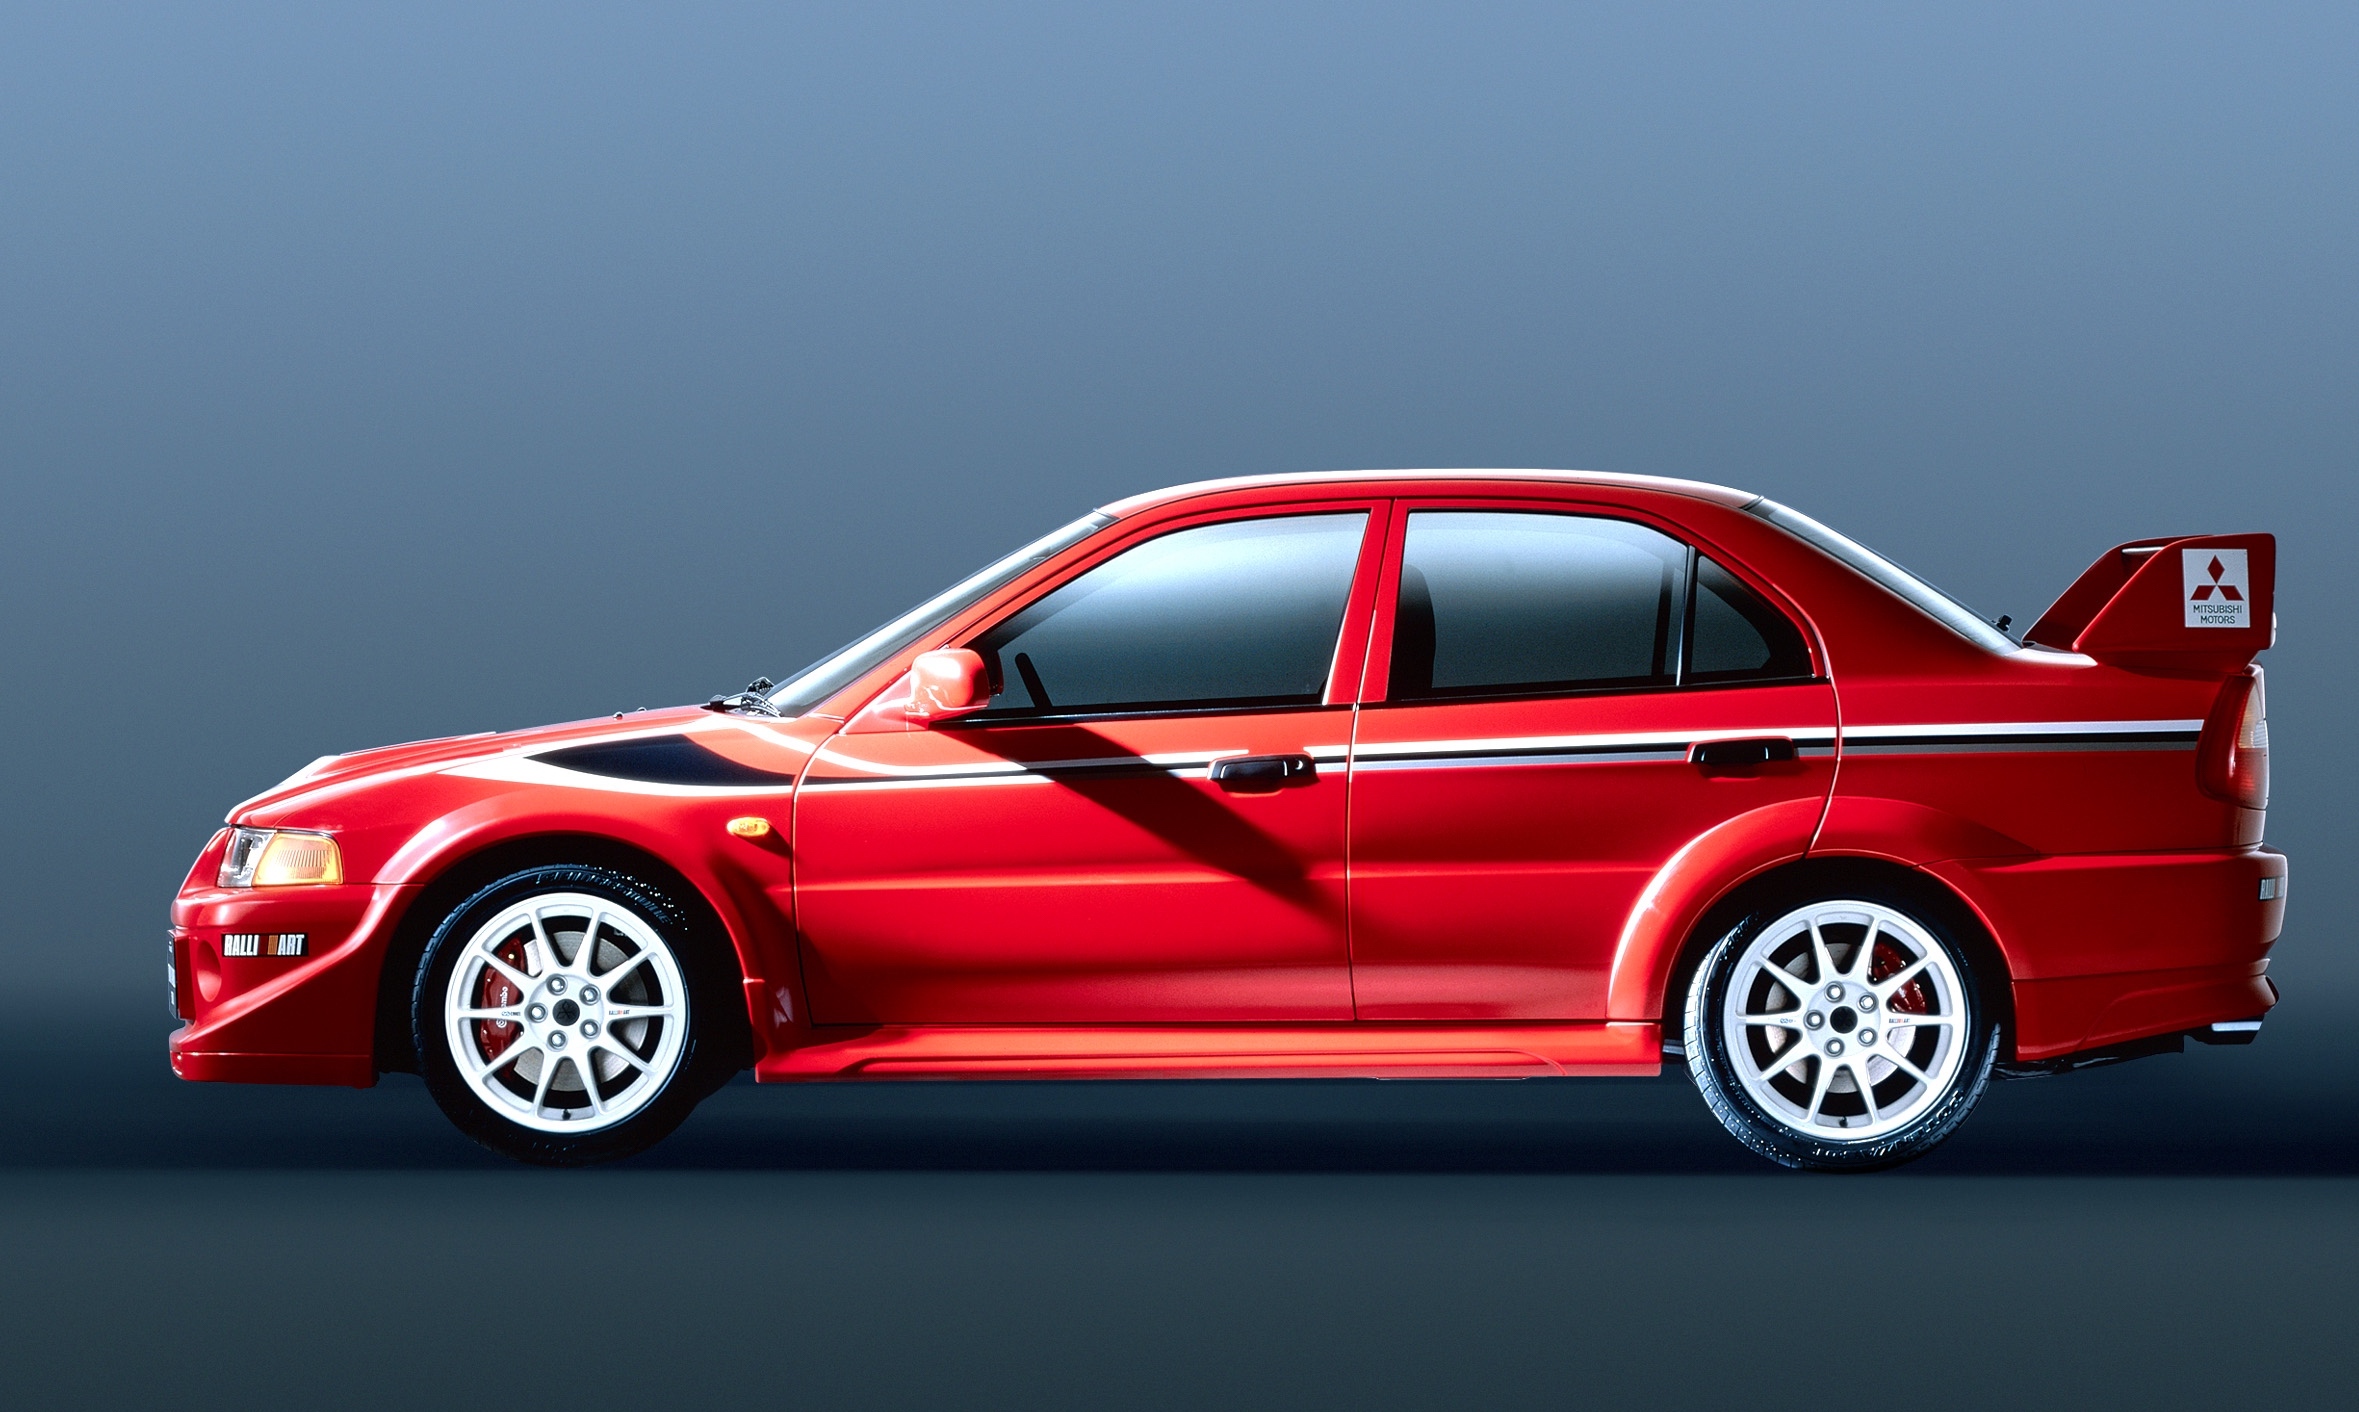 The Lancer Evo took huge amounts of inspiration from rallying